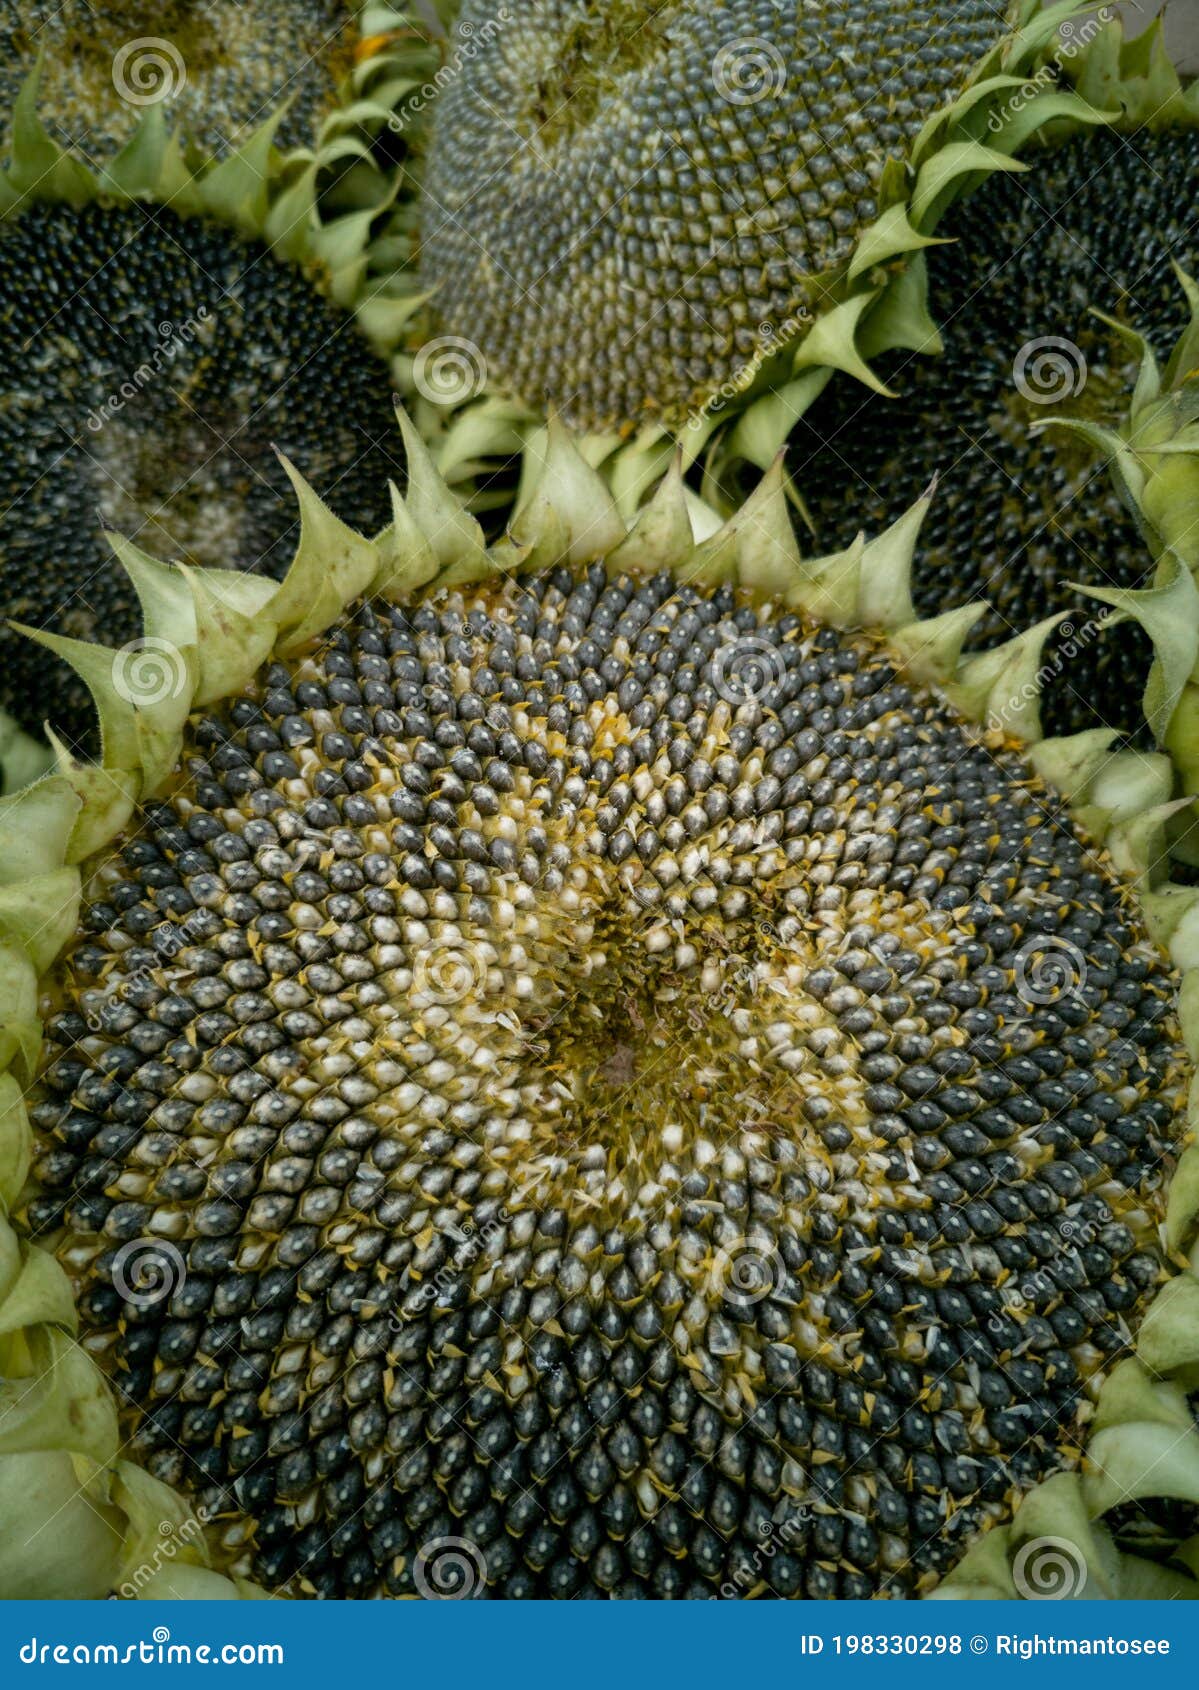 Harvested Cut of Sunflower Heads Full of Seeds Ready To Be Dried Stock ...